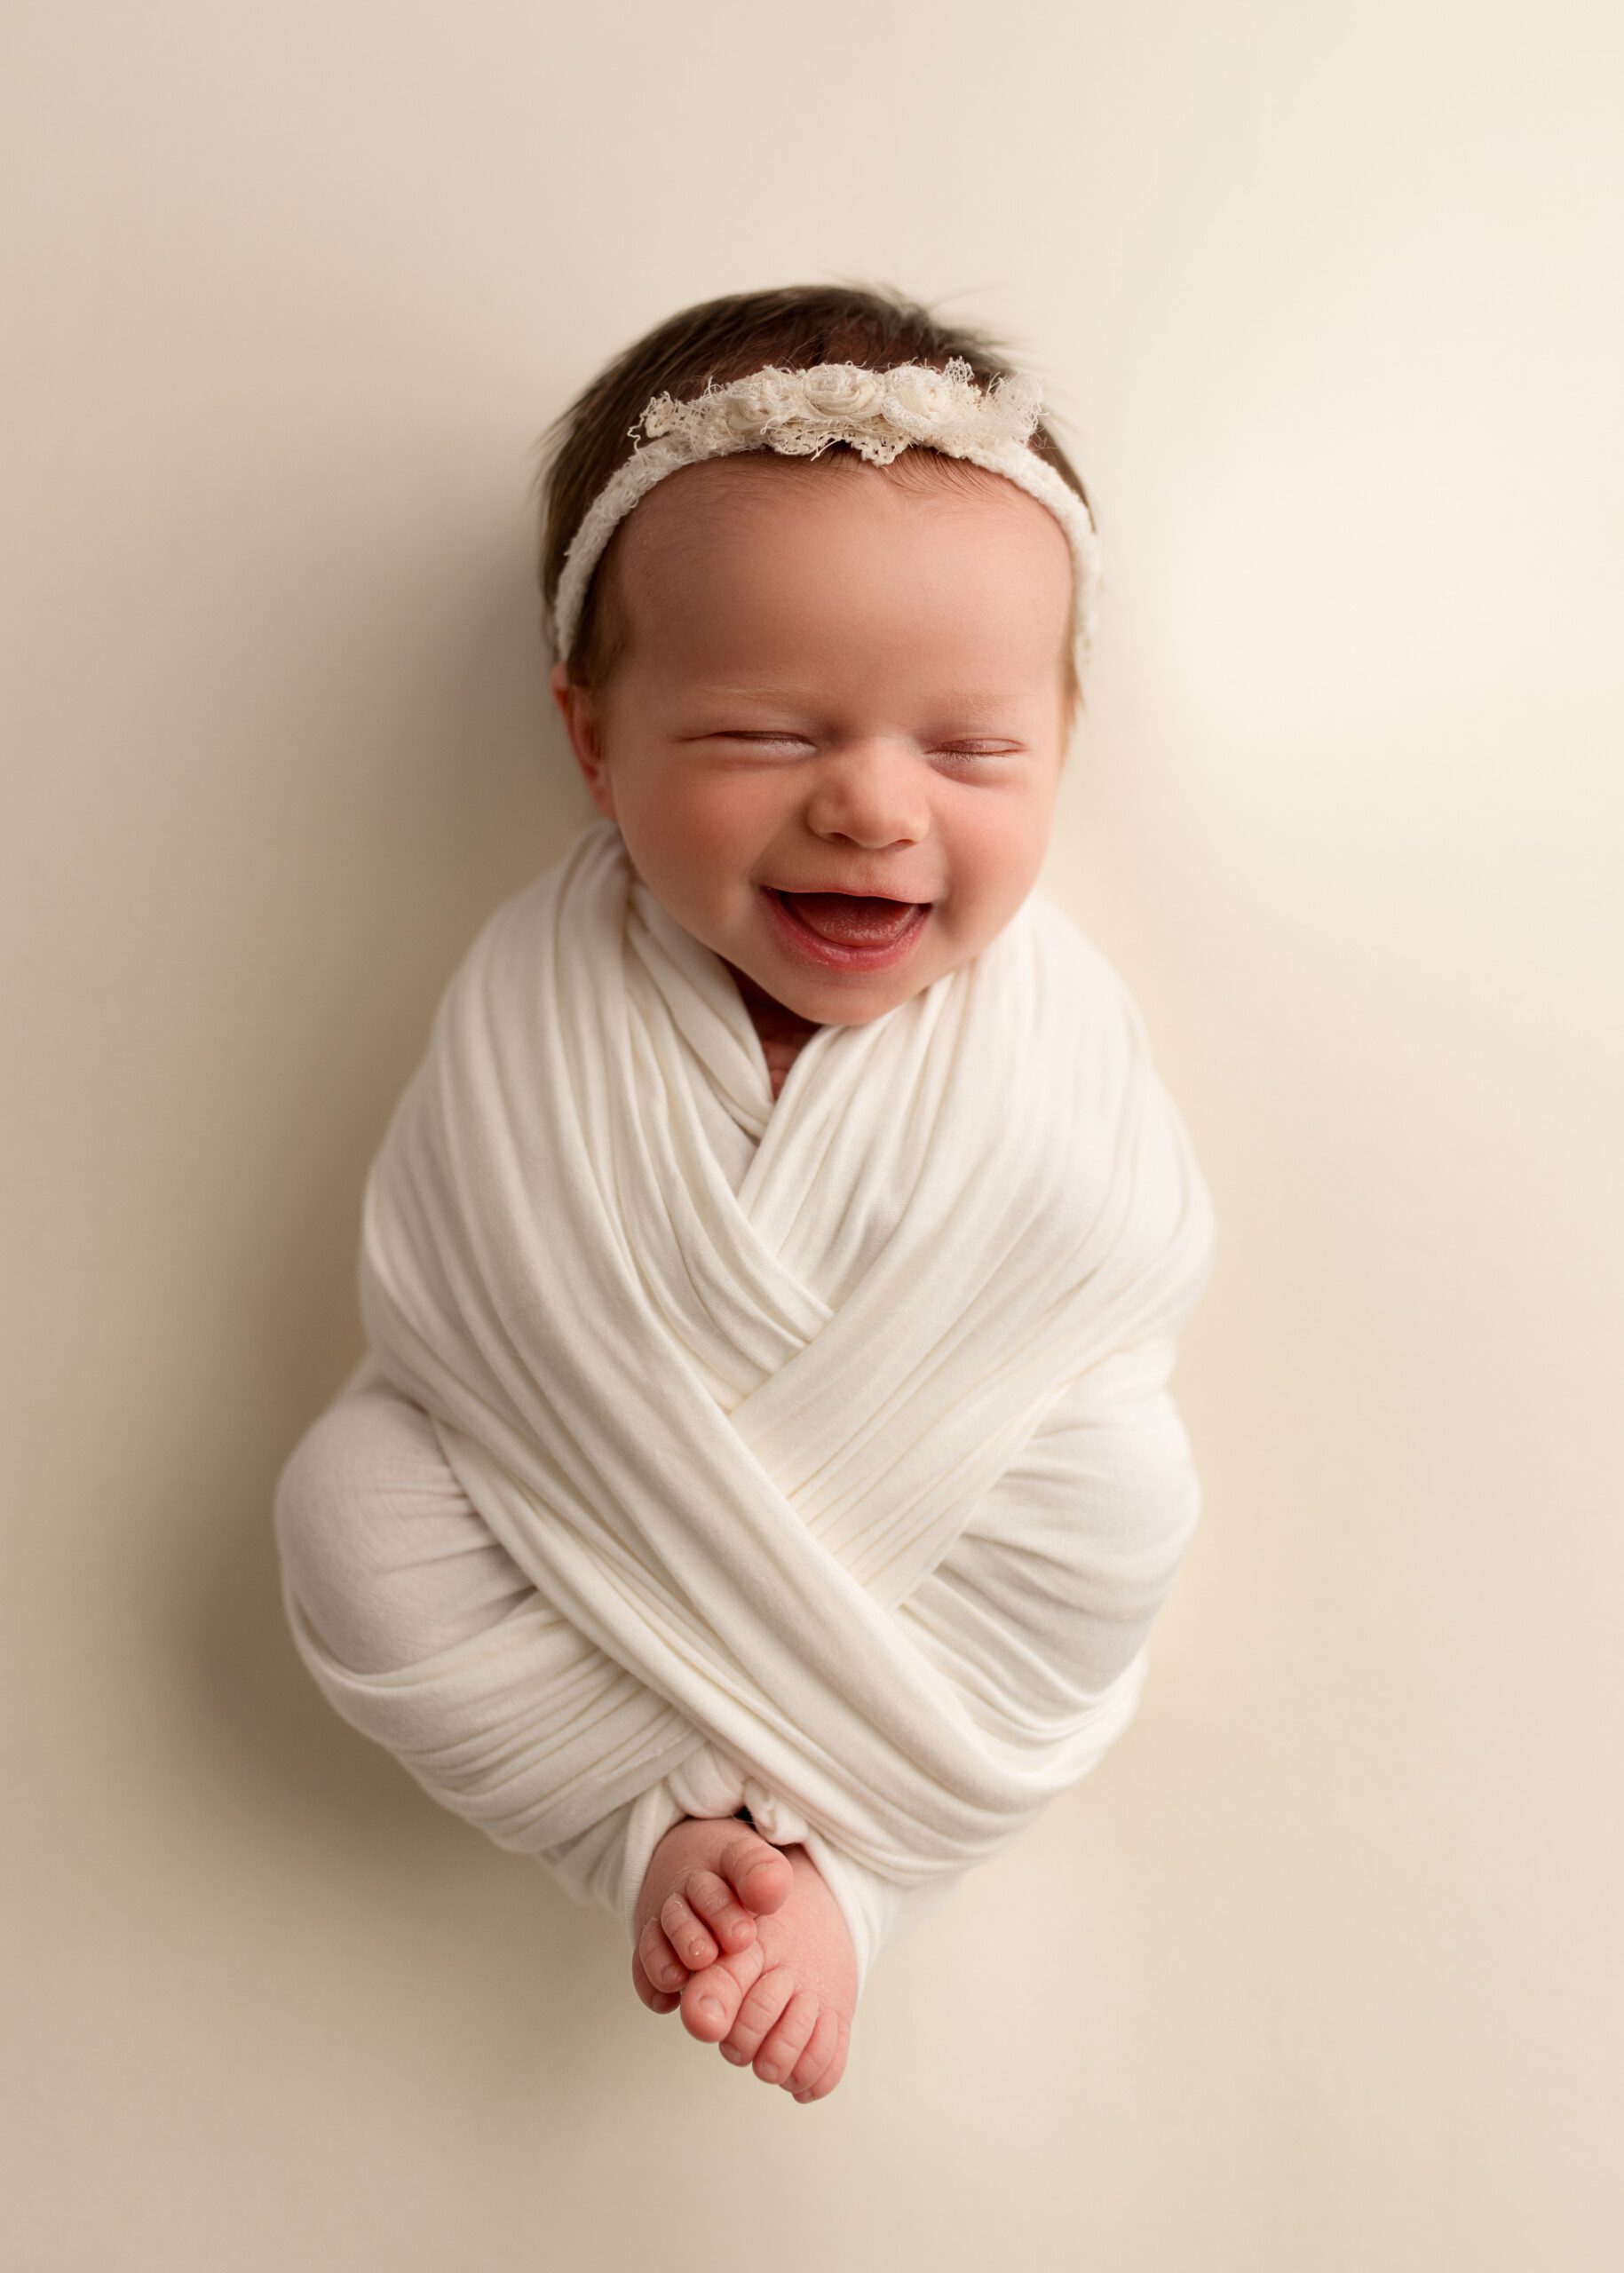 Swaddled Newborn baby girl smiling in Maria Angeles Photography Studio